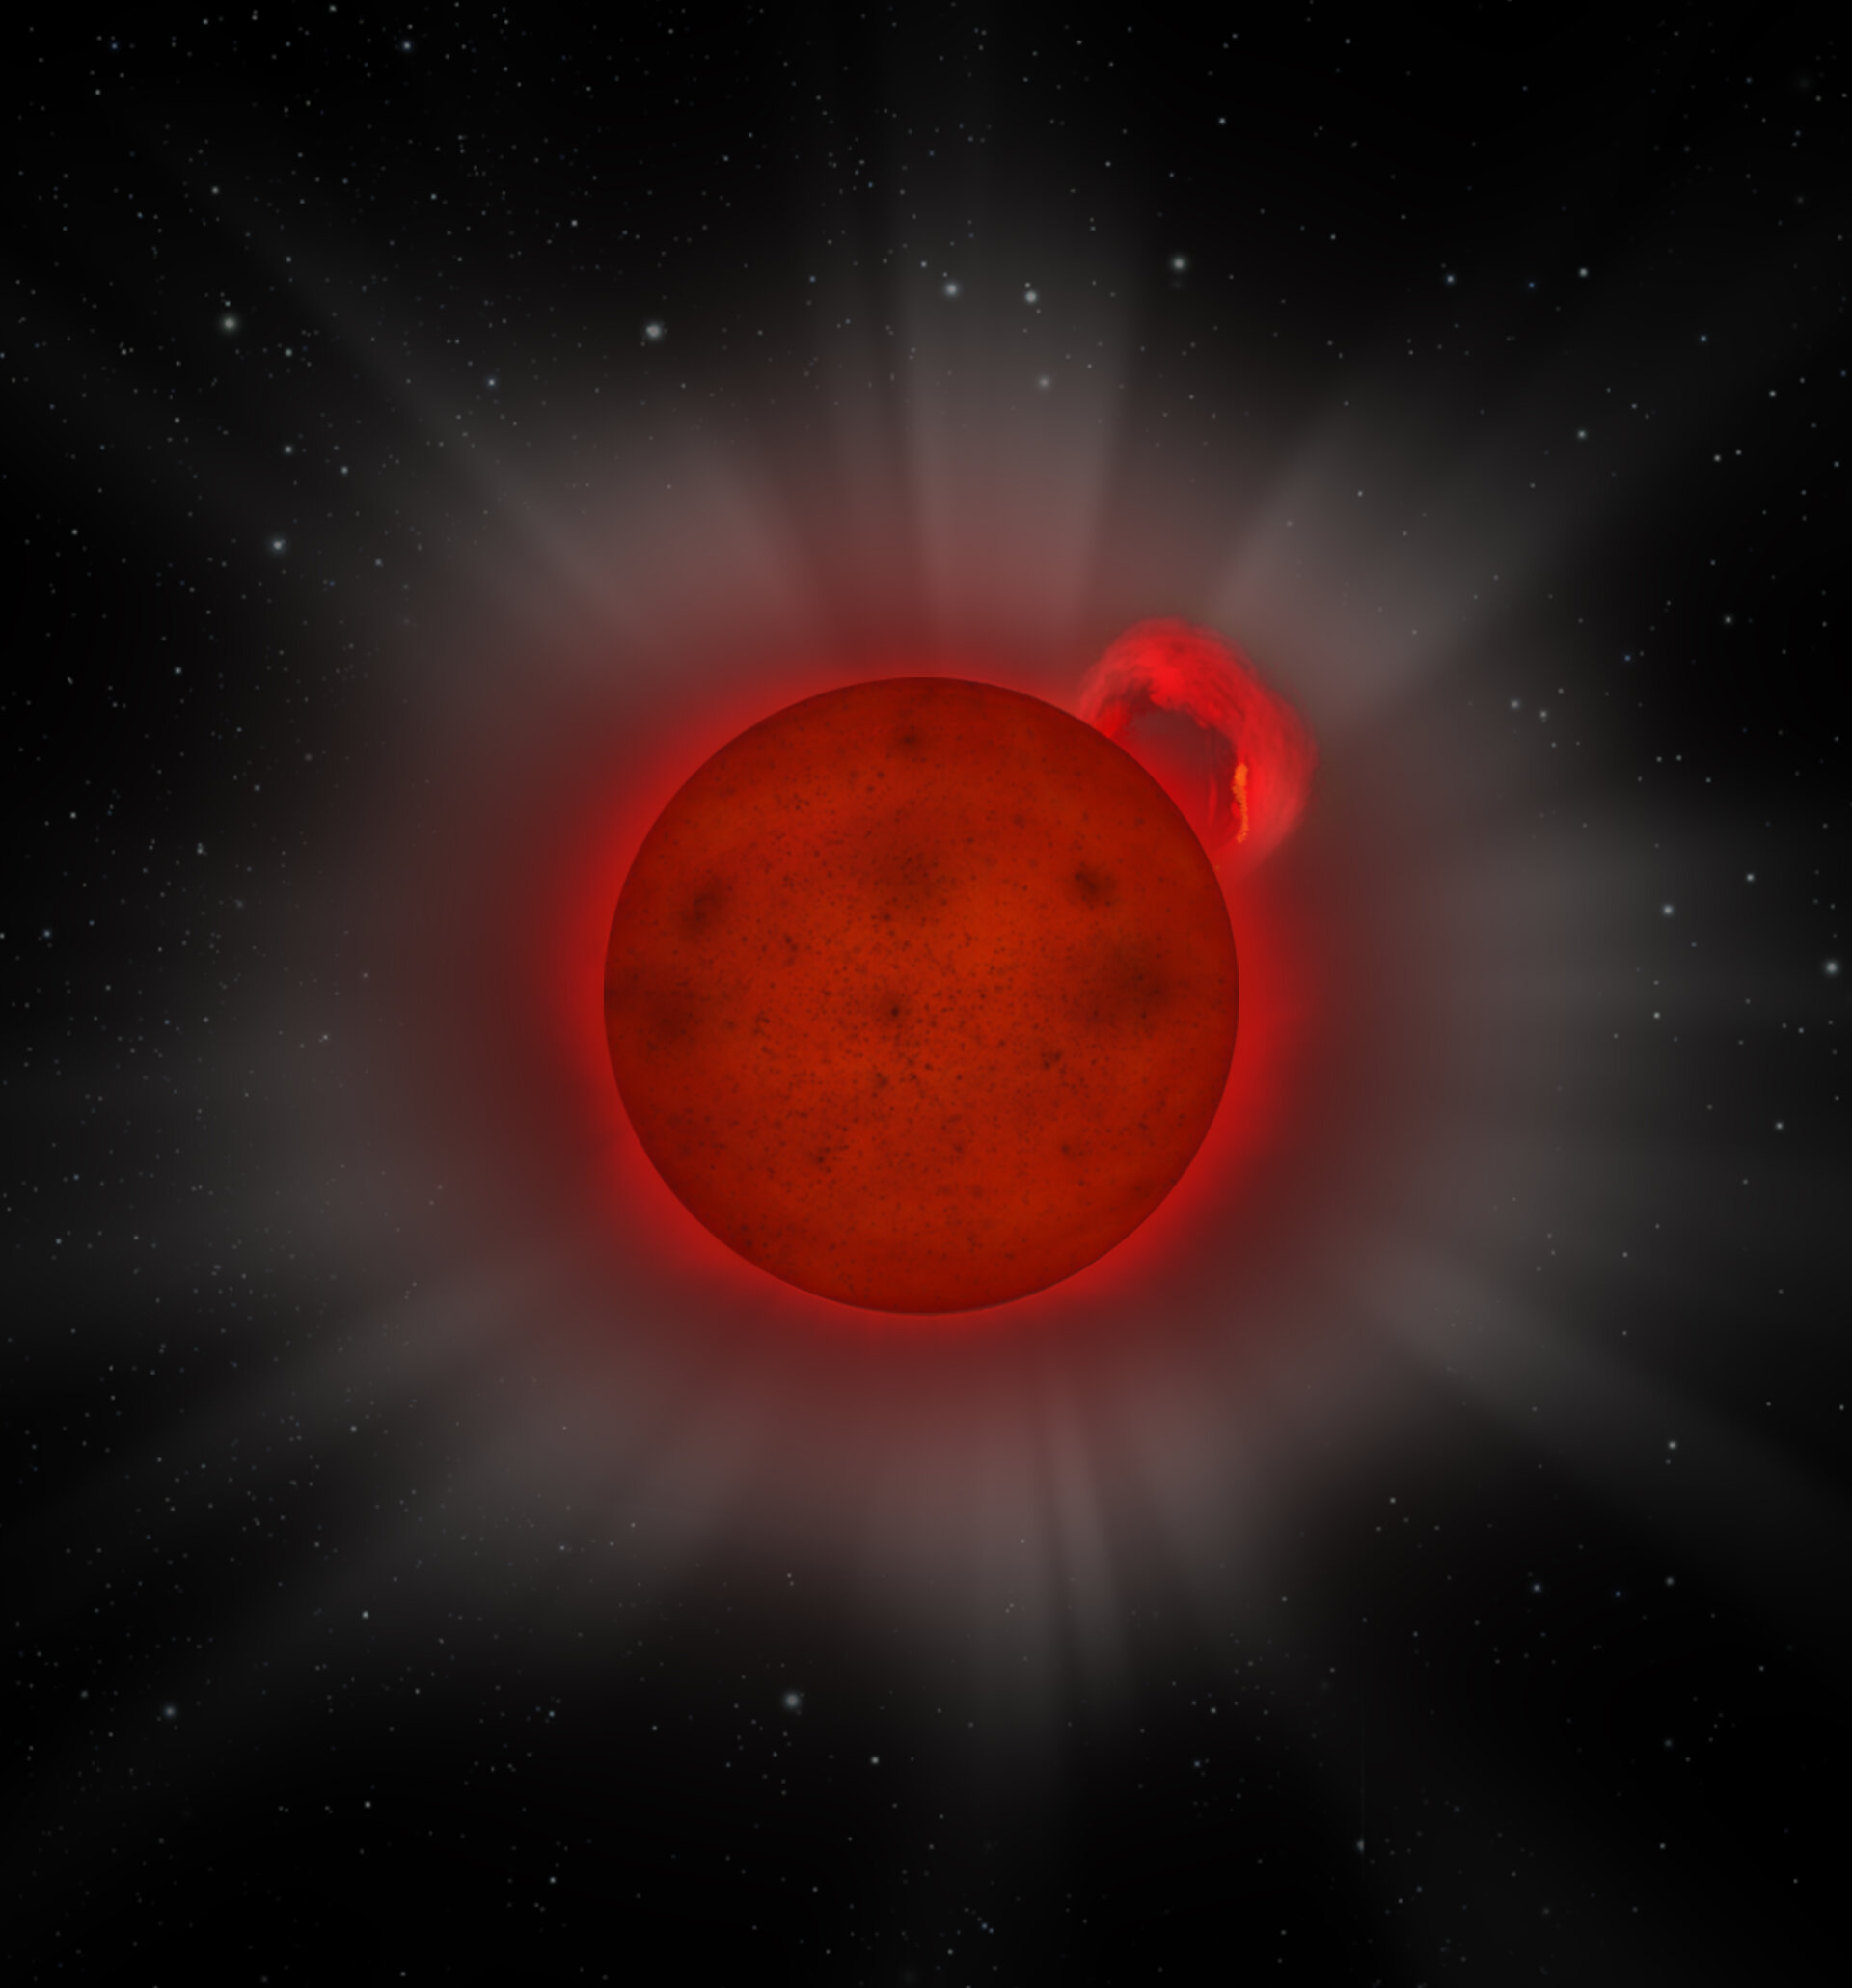 Artist's impression of the giant flare detected on the L dwarf J0331-27